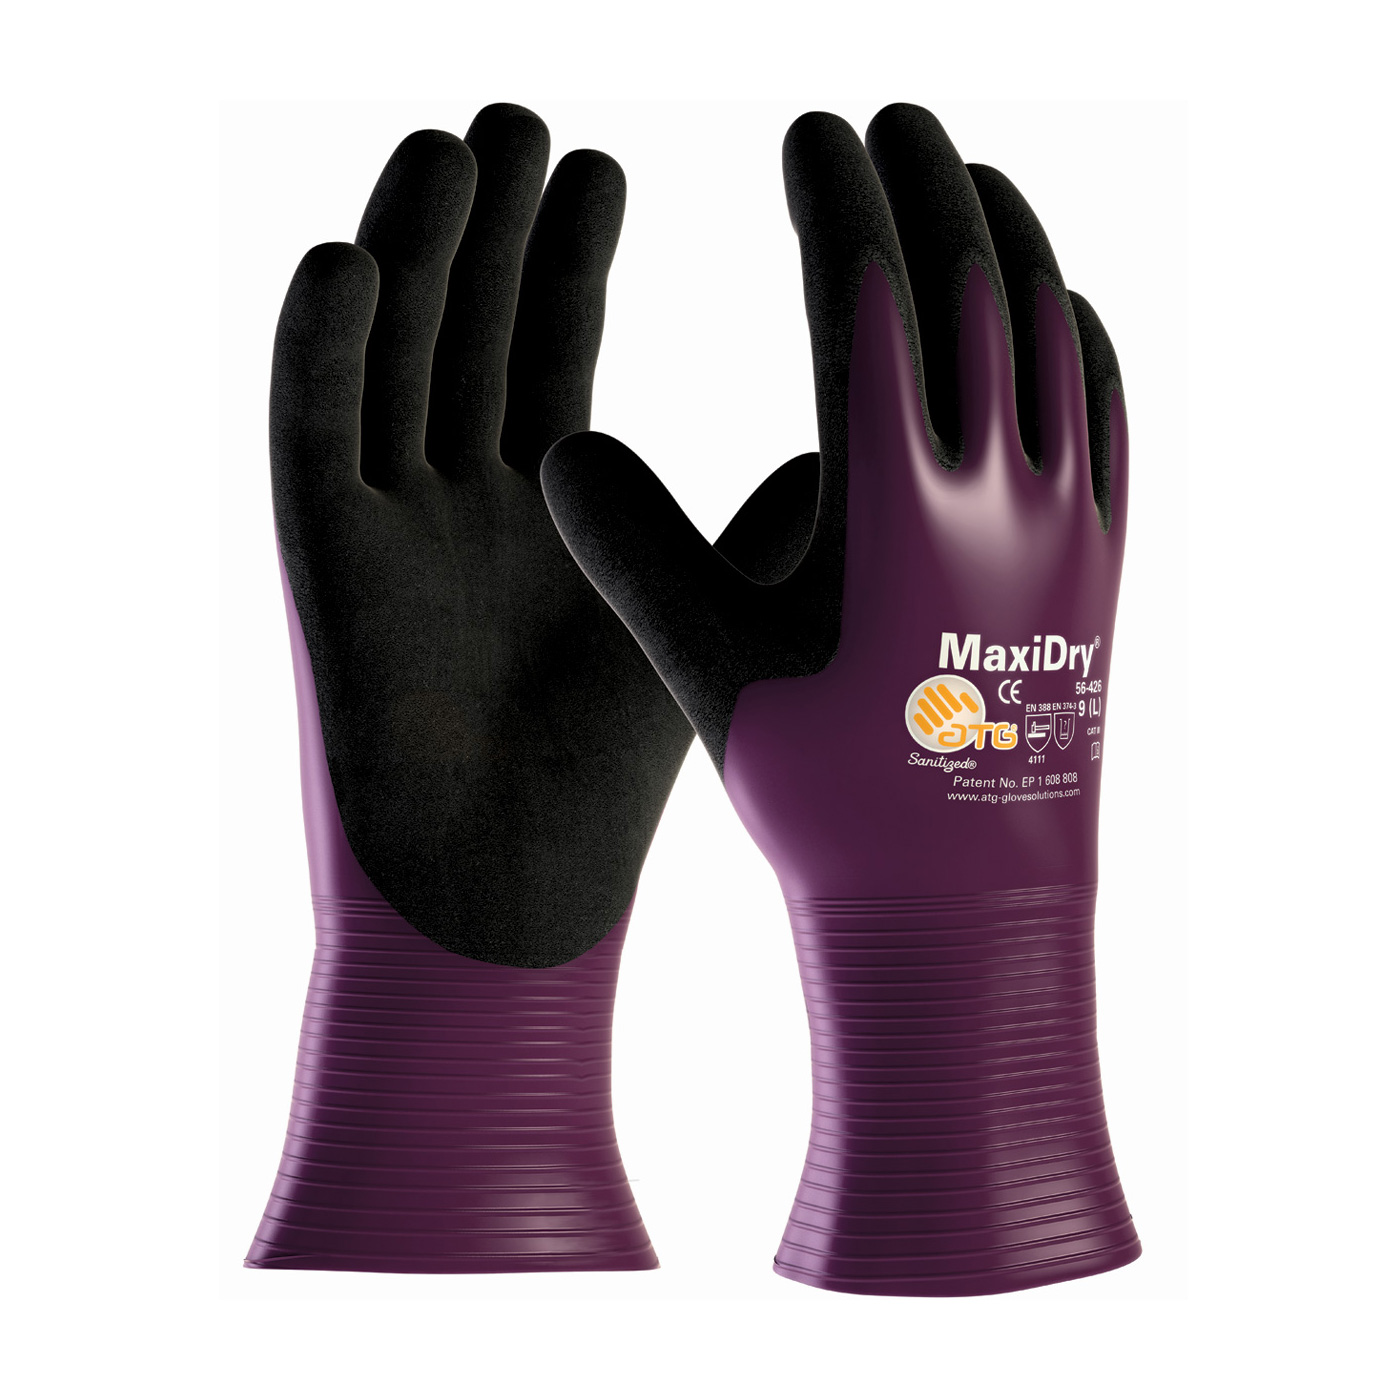 PIP 56-426/L MaxiDry Ultra Lightweight Nitrile Glove, Fully Dipped with Seamless Knit Nylon/Lycra Liner and Non-Slip Grip on Palm & Fingers - Large PID-56 426 LARGE